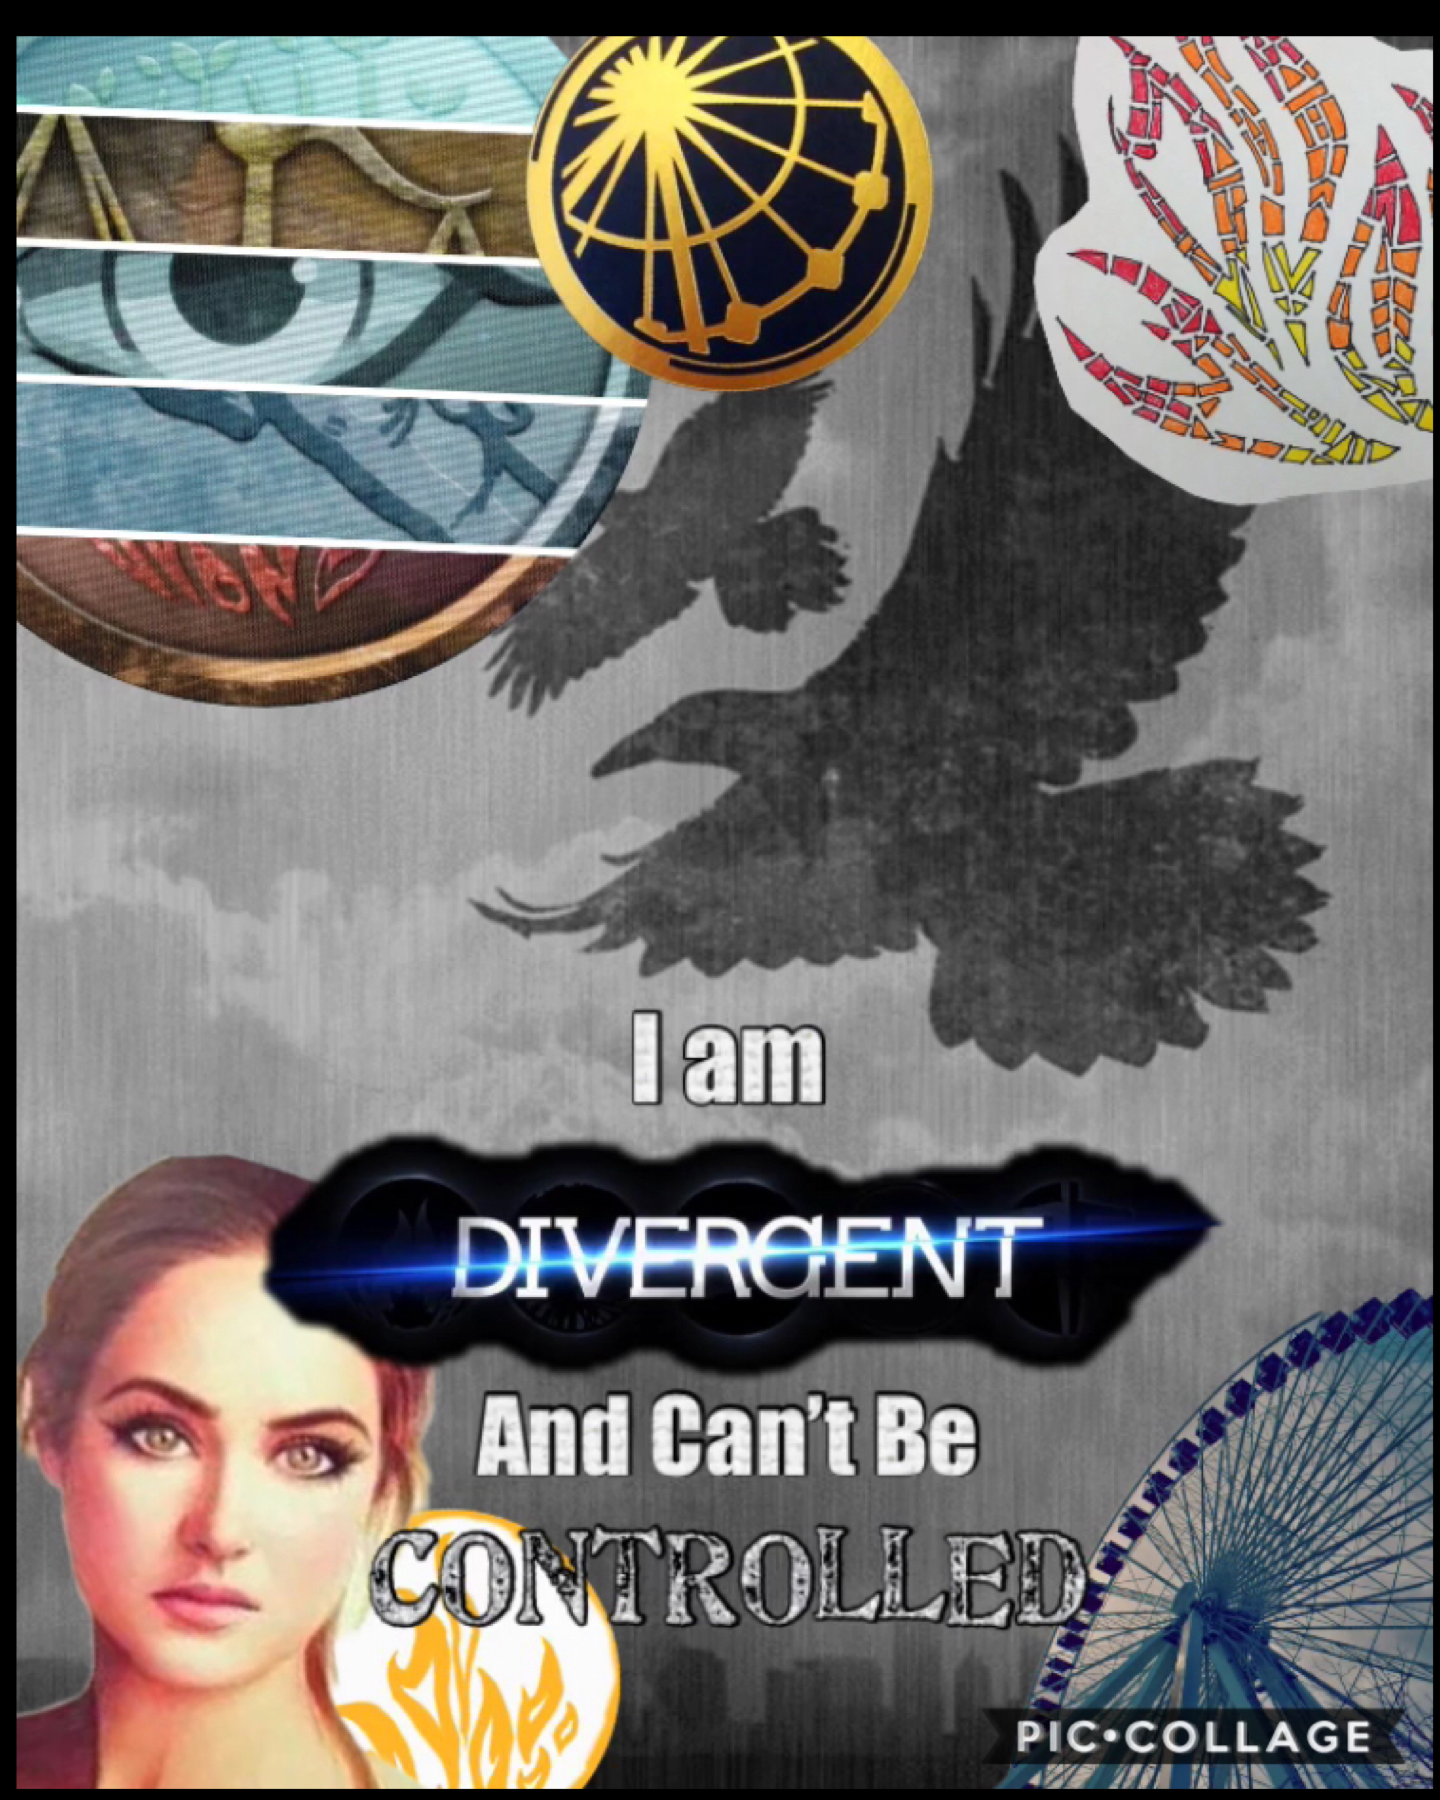 Here is a collage I made from on of my favorite books by Veronica Roth!